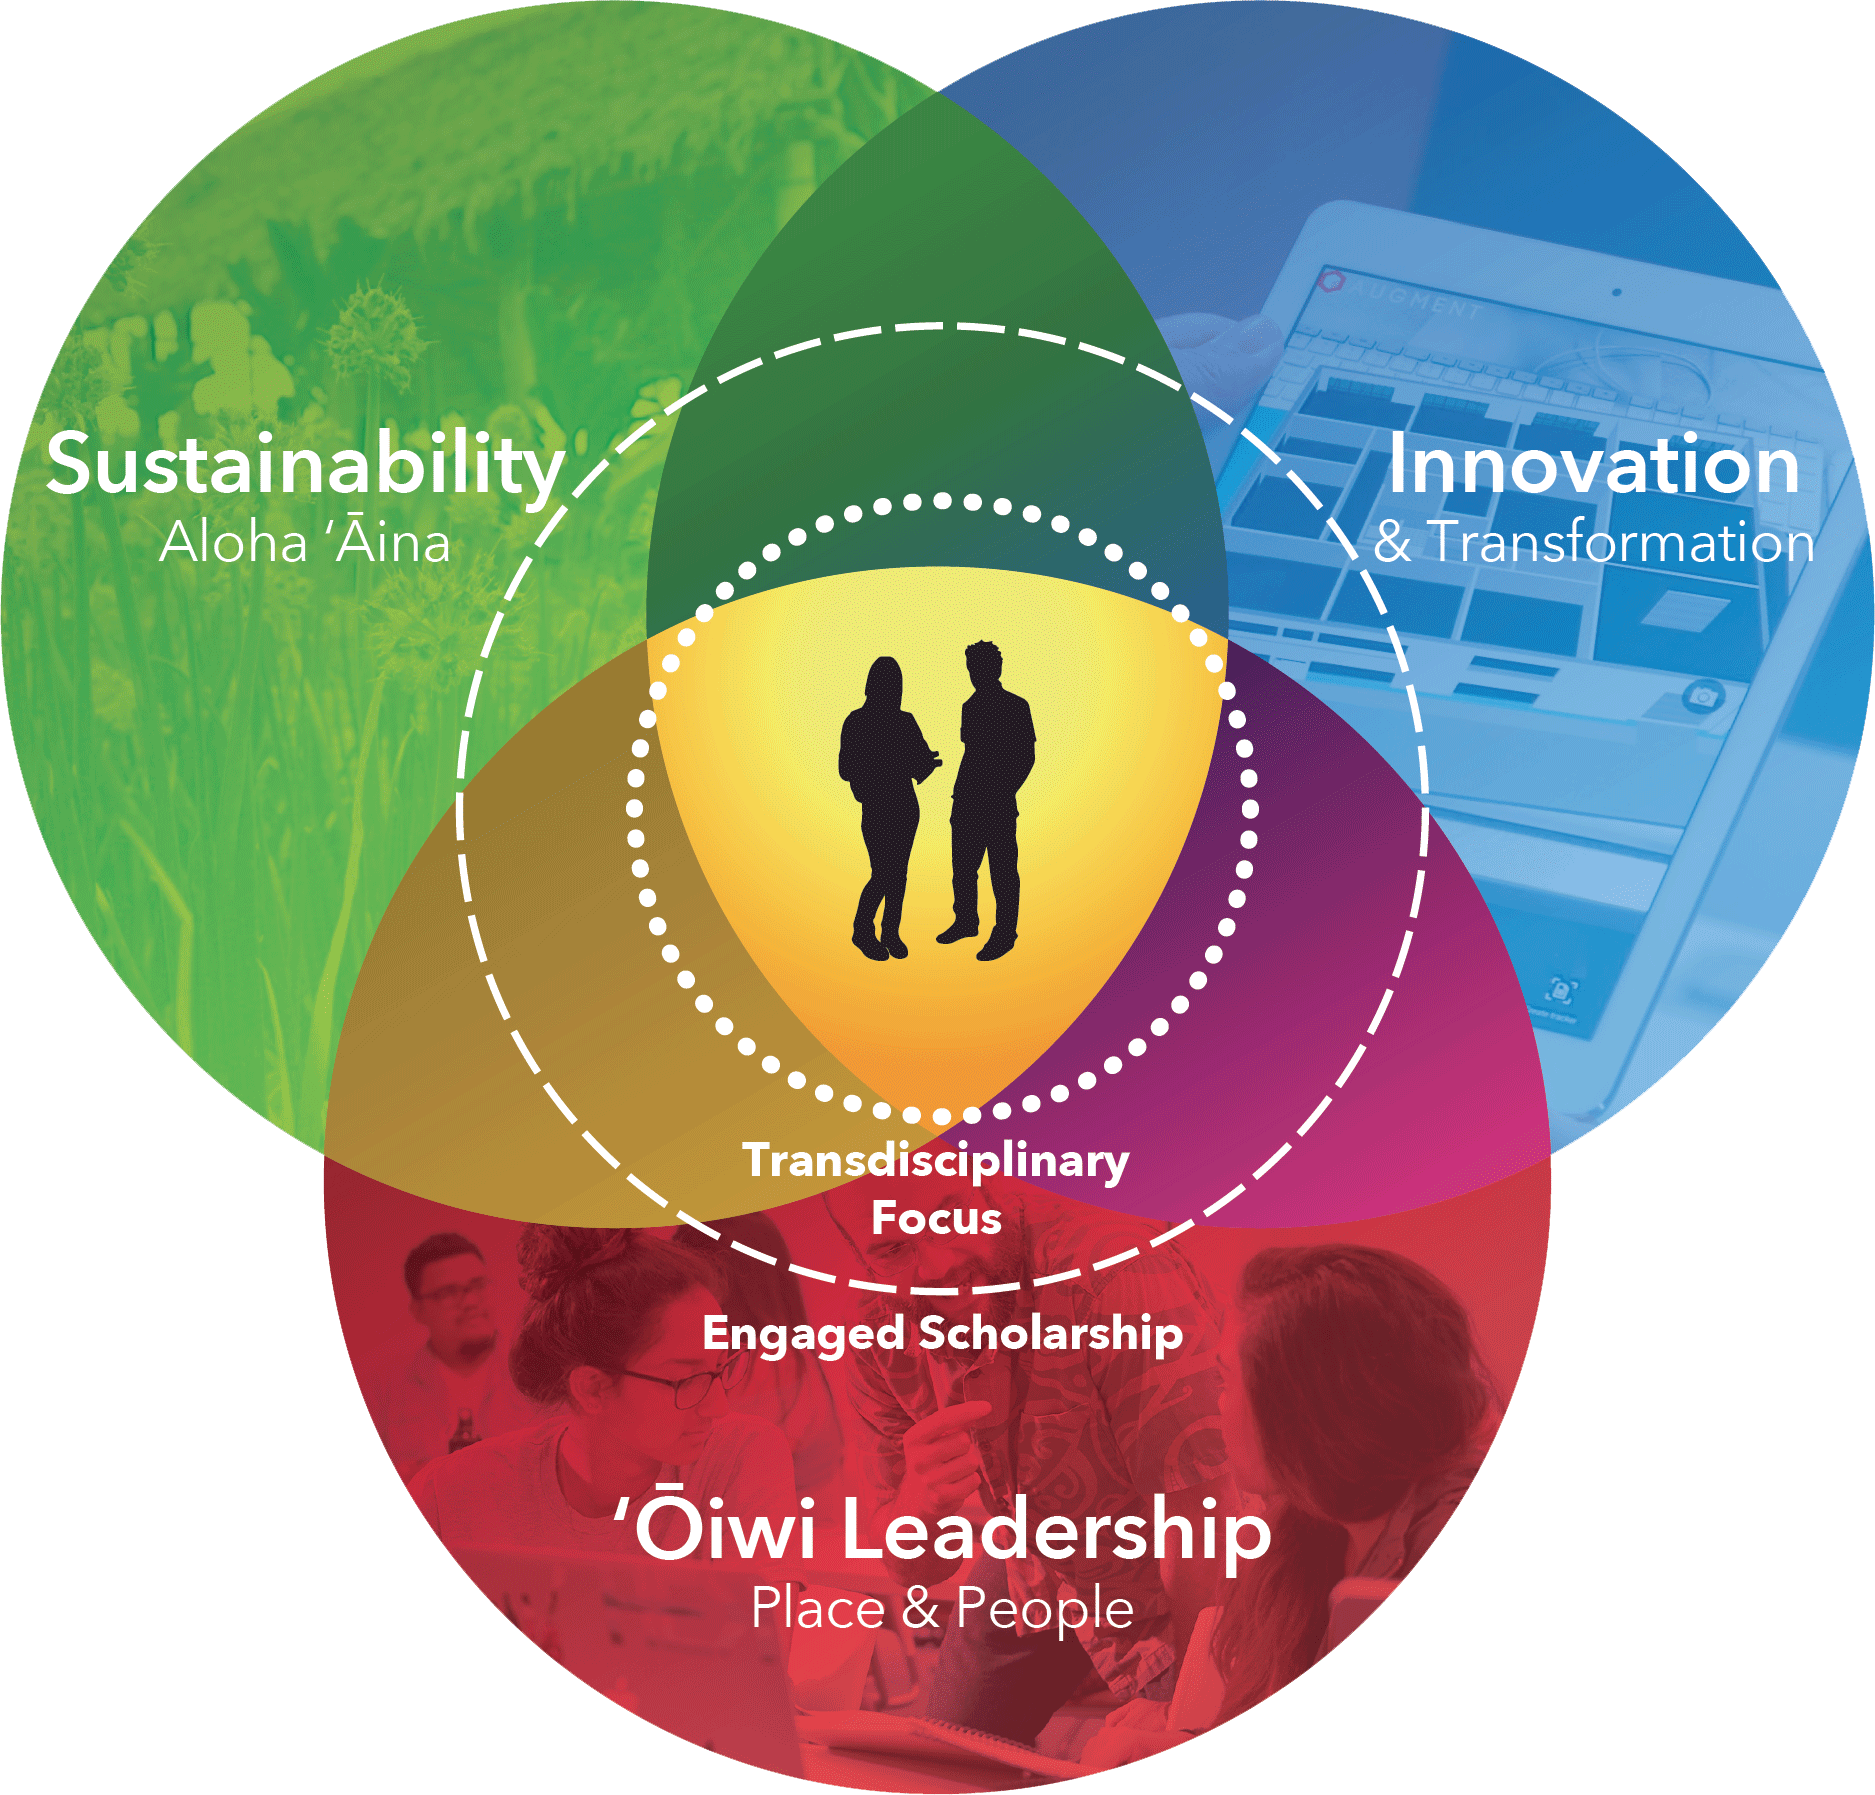 A Venn diagram of three concepts: Sustainability, Innovation, and ʻŌiwi Leadership.  Transdisciplinary focus and Engaged Scholarship is the intersection.